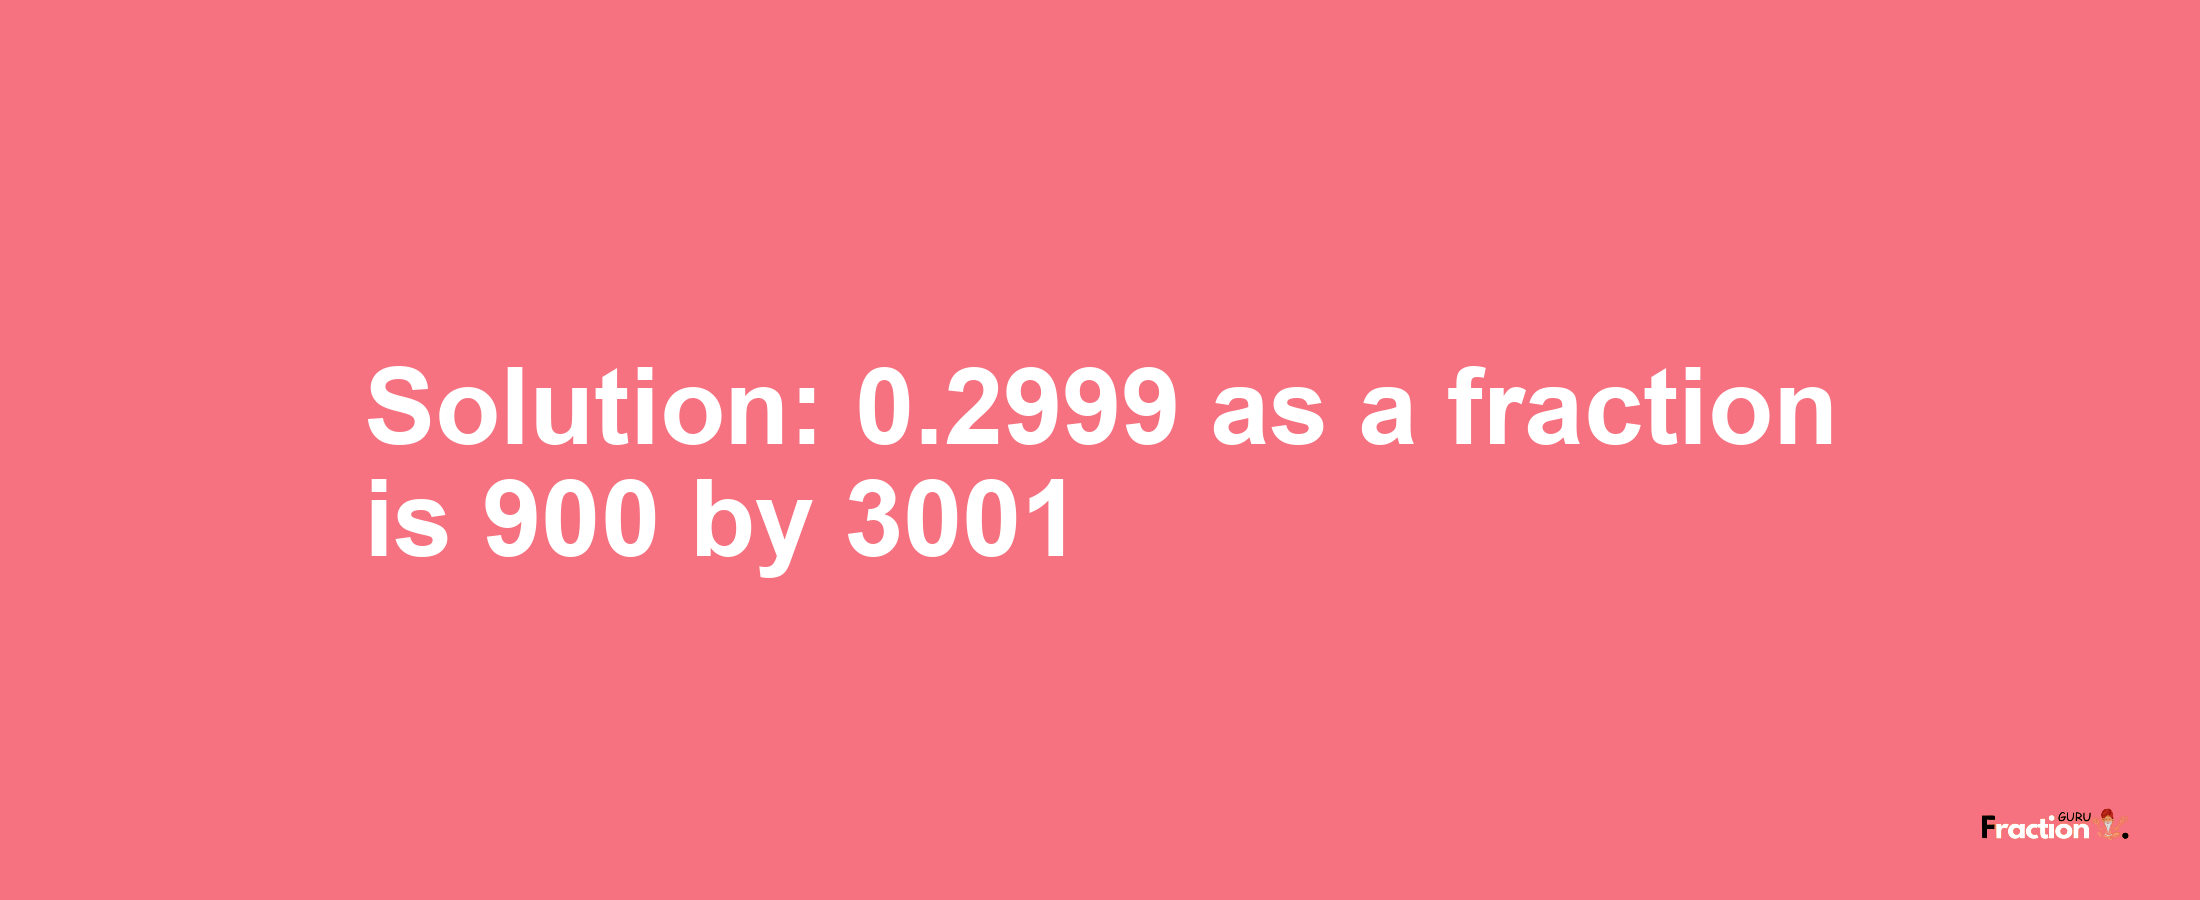 Solution:0.2999 as a fraction is 900/3001